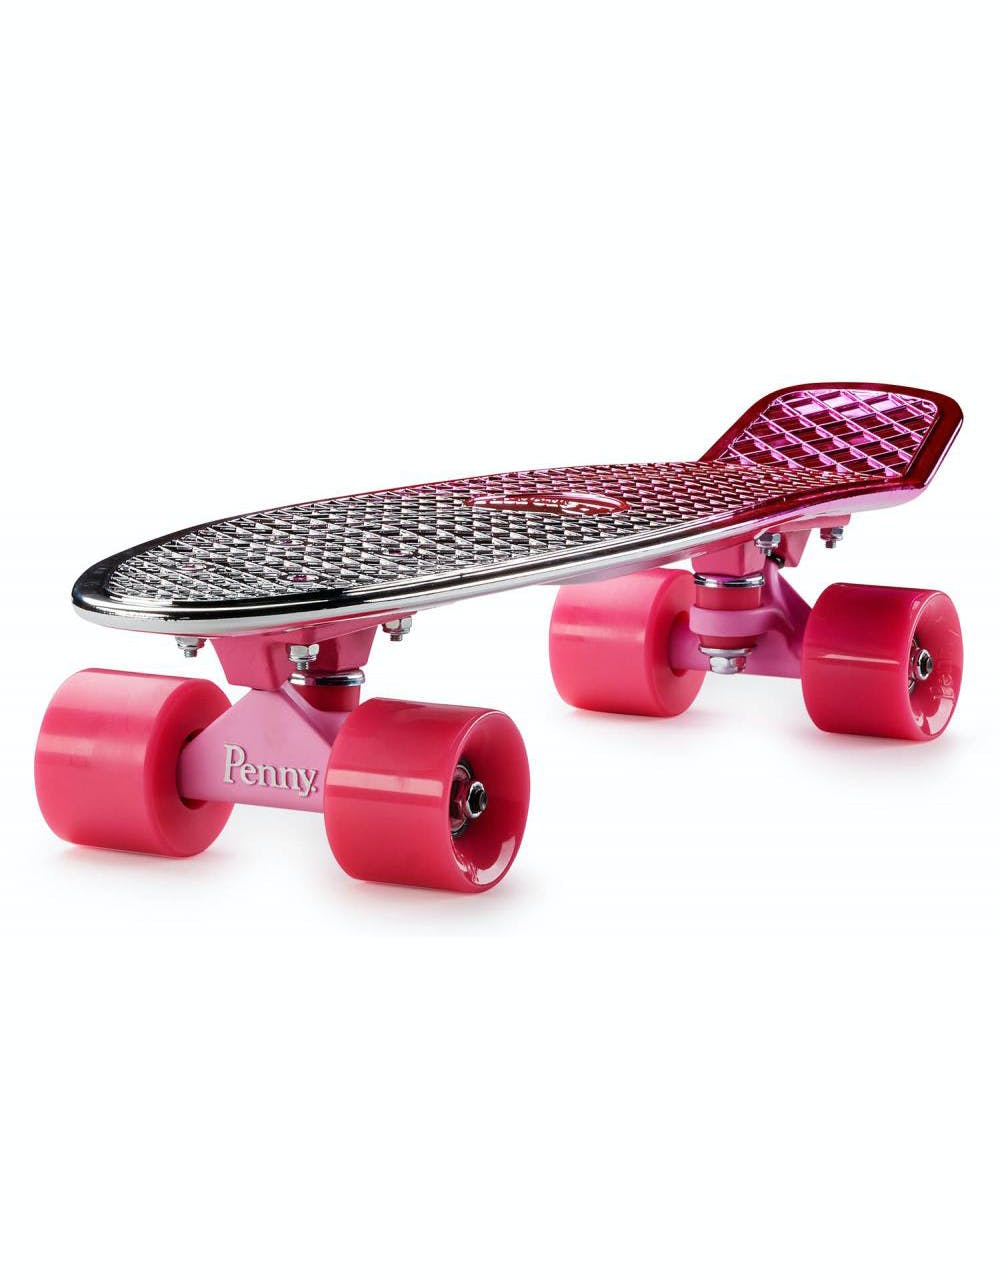 Penny Skateboards Metallic Fades Classic Cruiser - 22" - Silver/Pink M